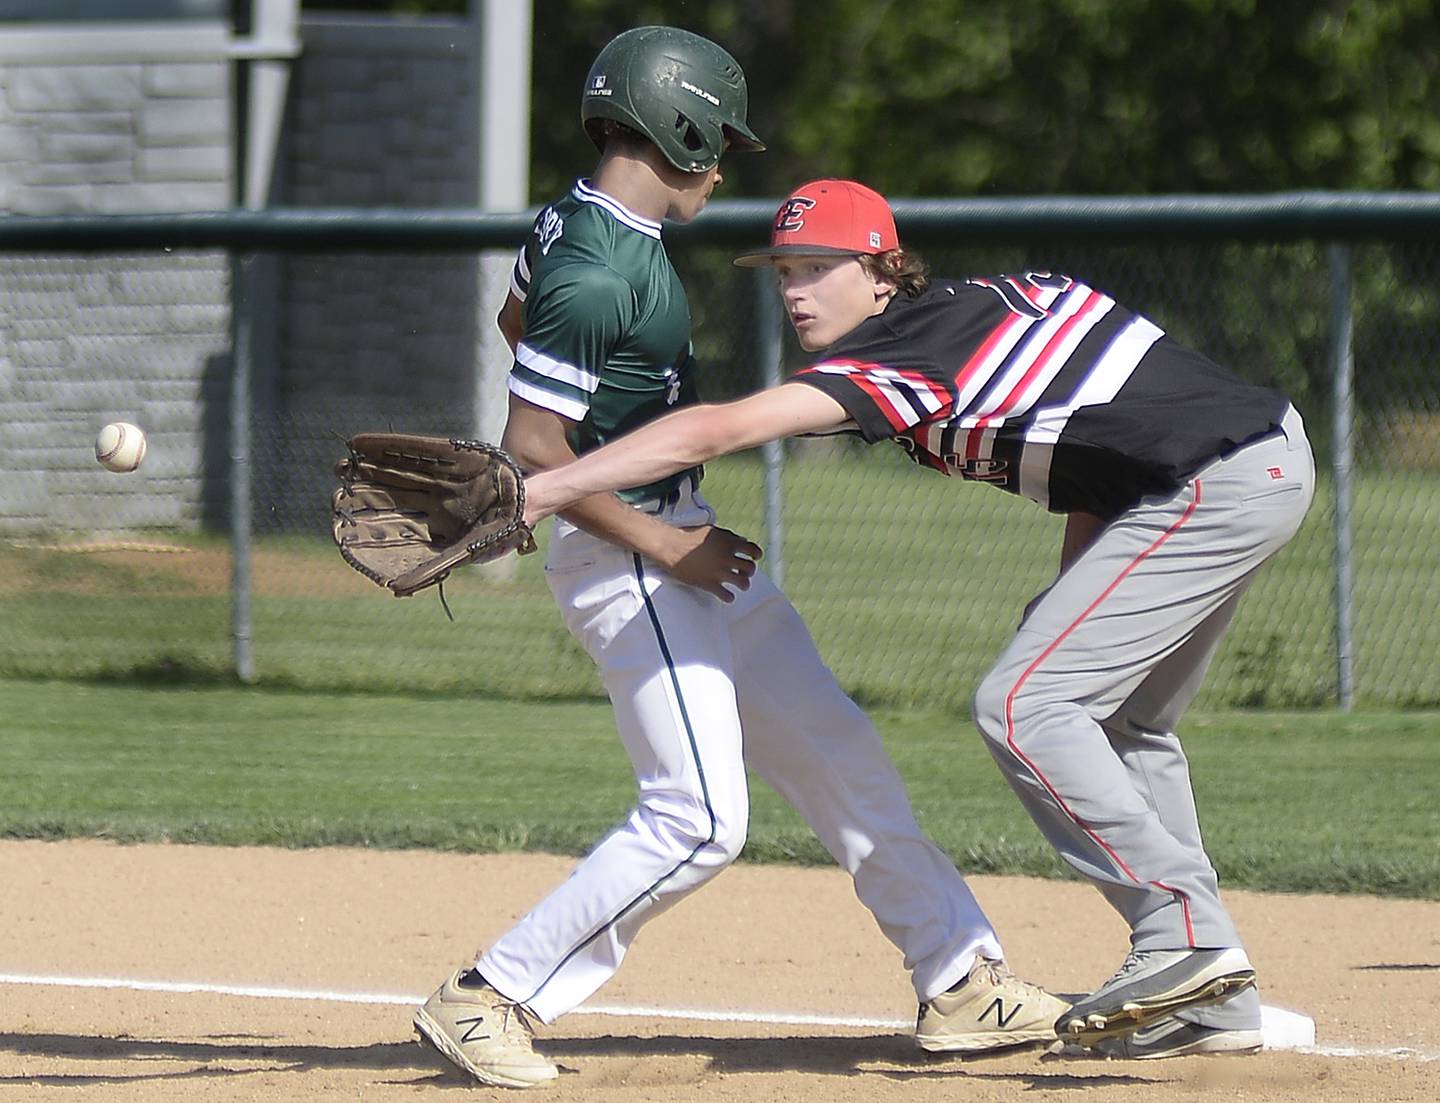 Earlville first baseman Ryan Browder reaches for a pickoff throw as St. Bede baserunner Tyreke Fortney scampers back to the bag Monday, May 16, 2022, at St. Bede Academy.